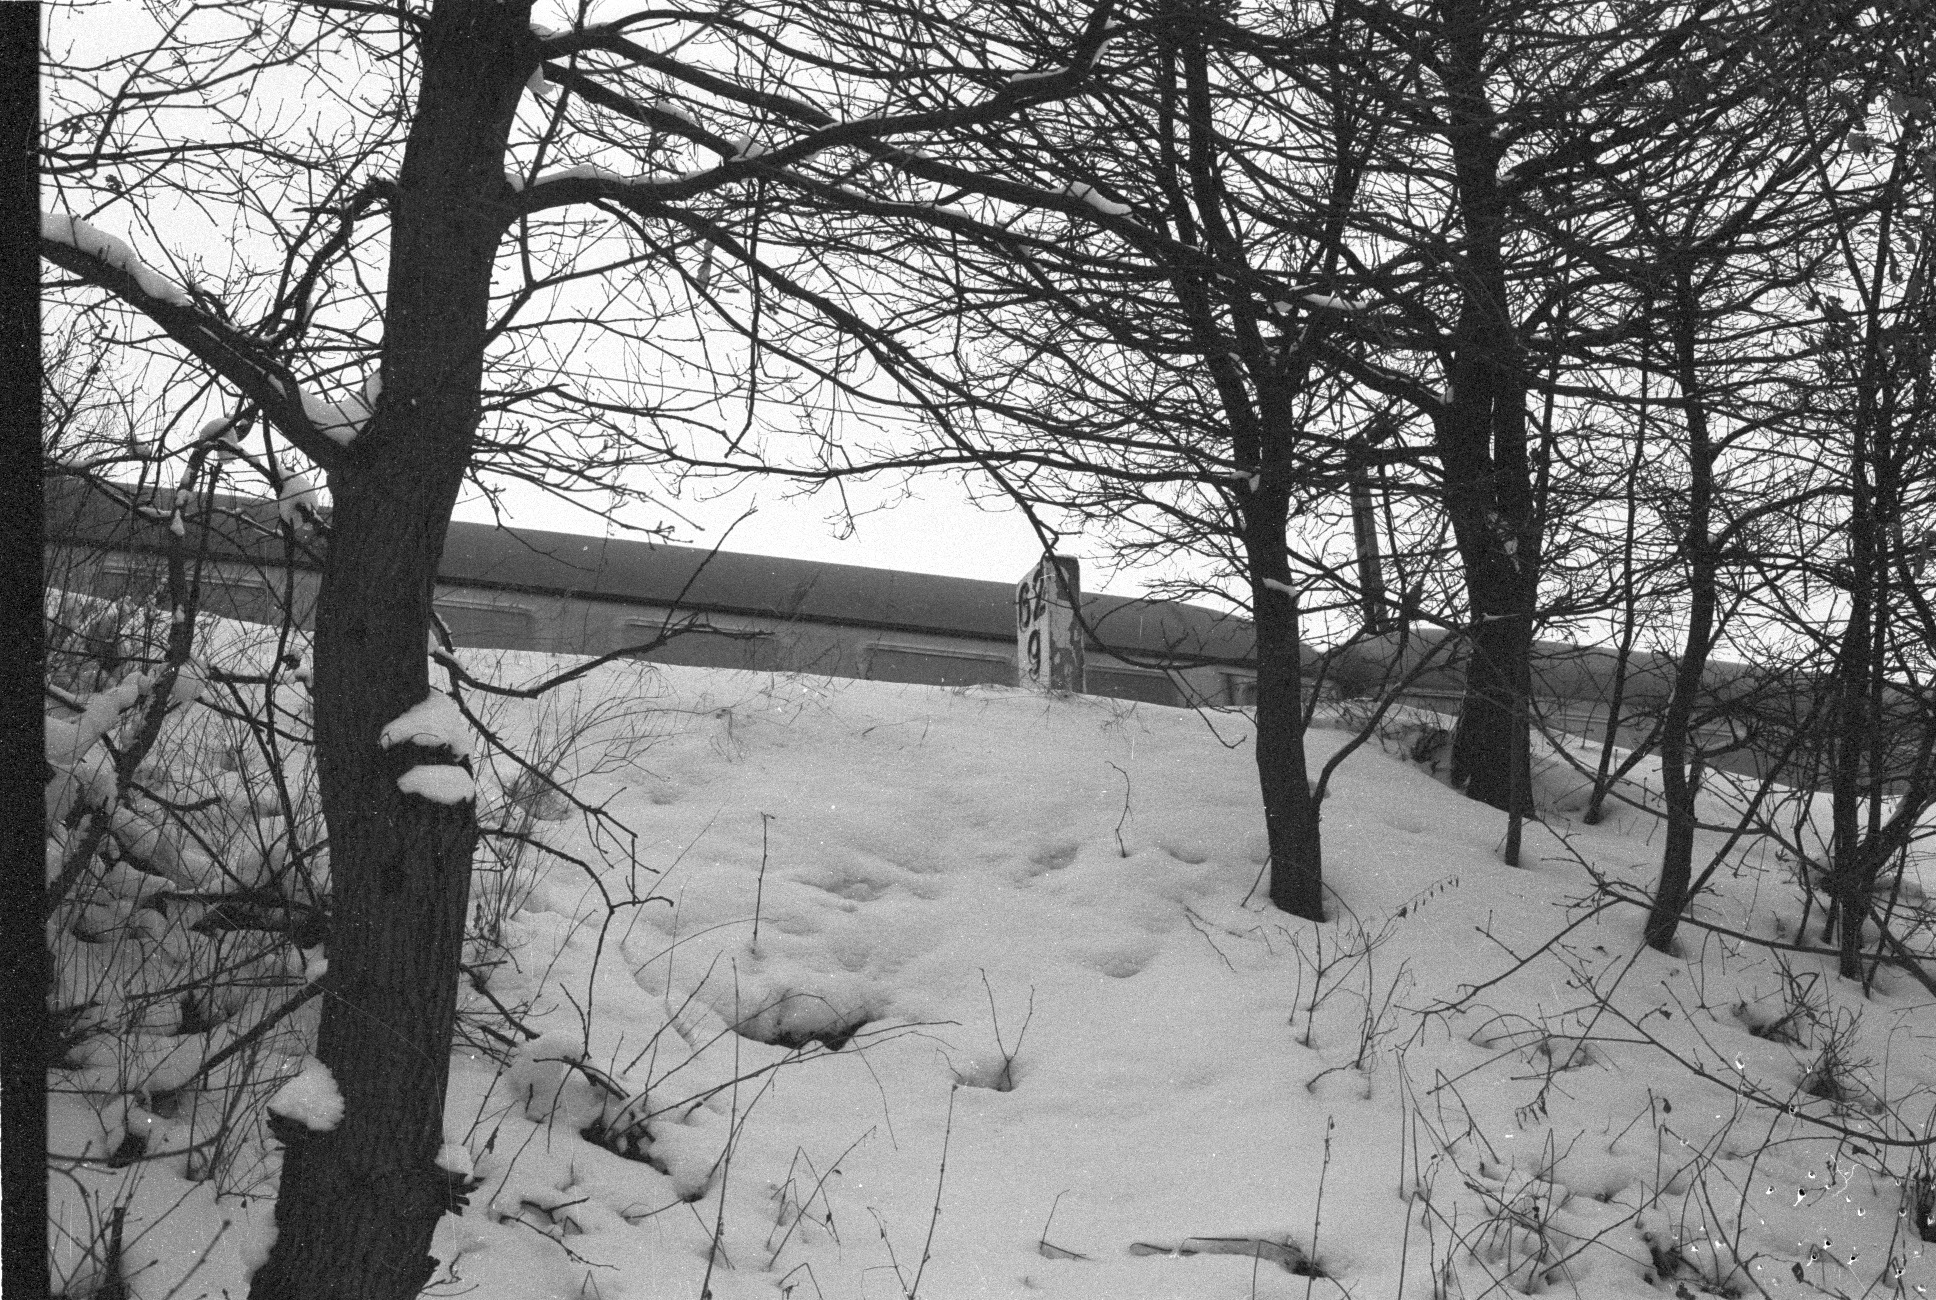 a dog standing on a snowy slope by some trees